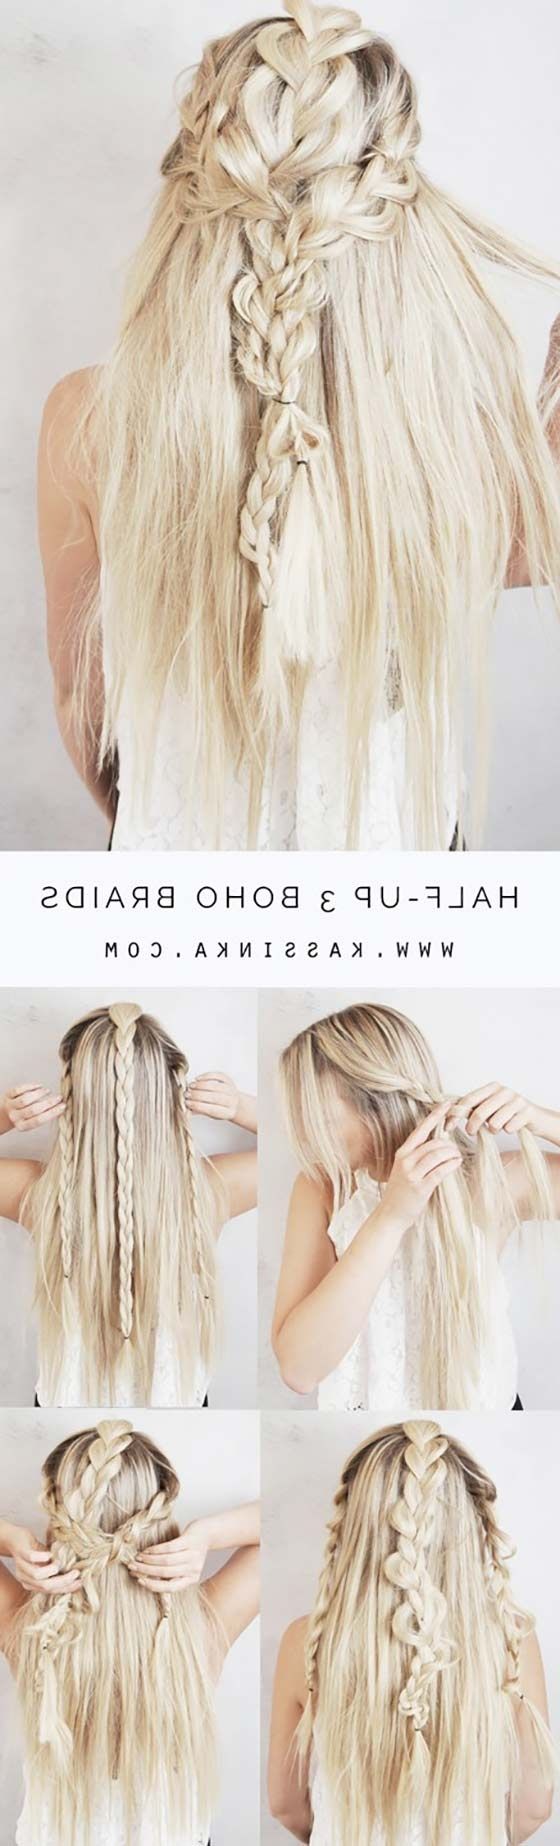 40 Braided Hairstyles For Long Hair Intended For Well Known Braid Hairstyles For Long Hair (View 5 of 15)